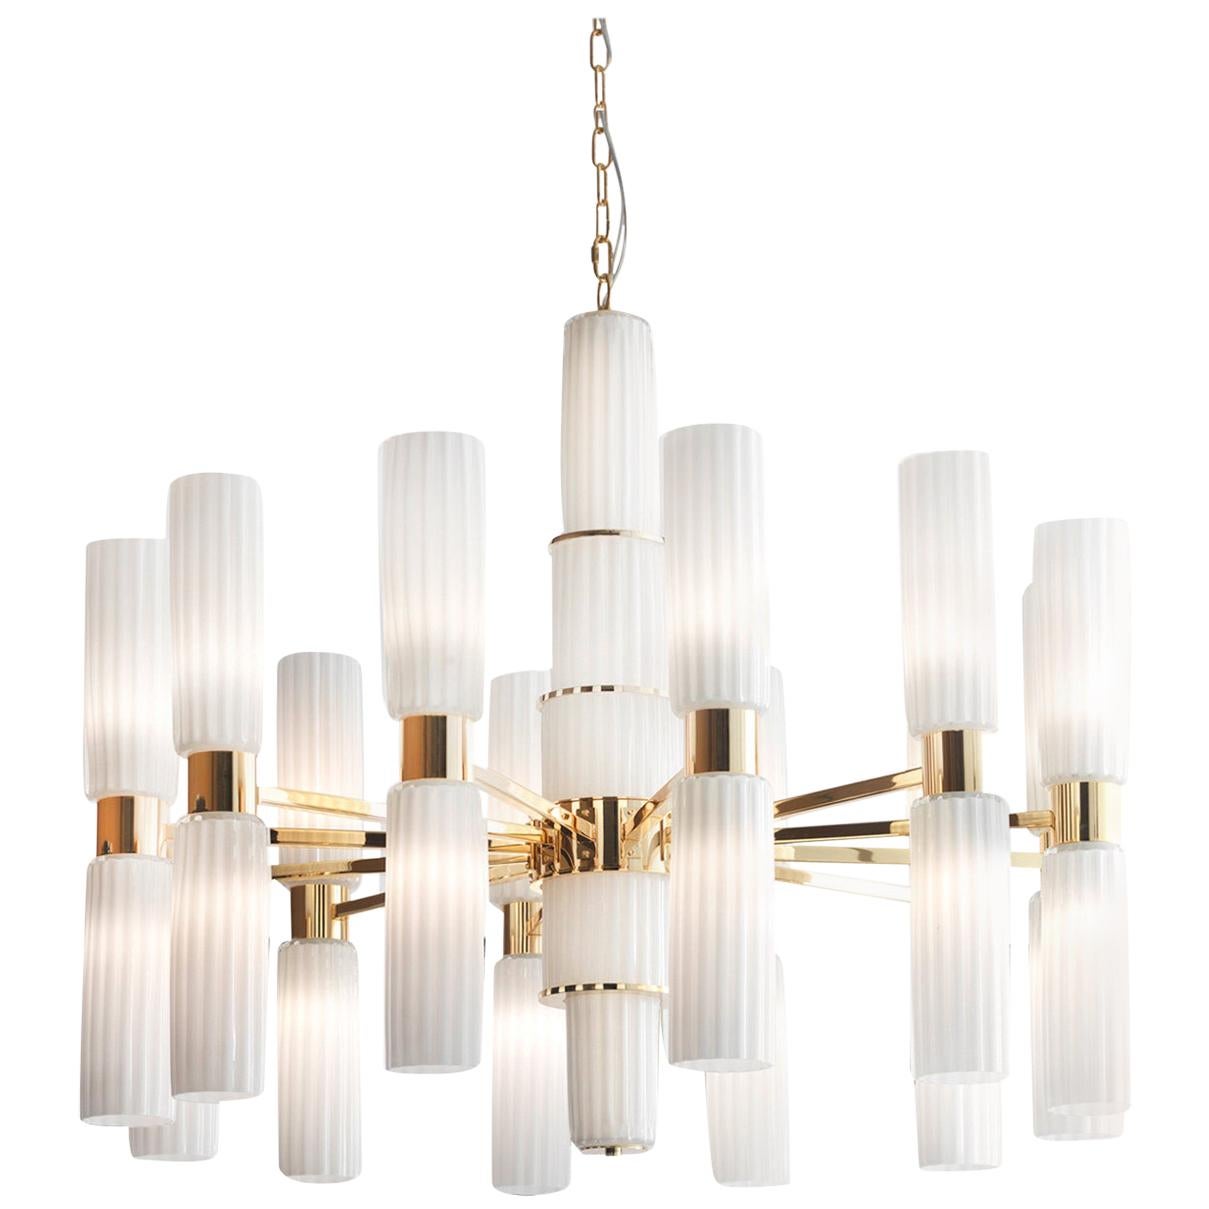 Gold and White Glass Chandelier #1 For Sale